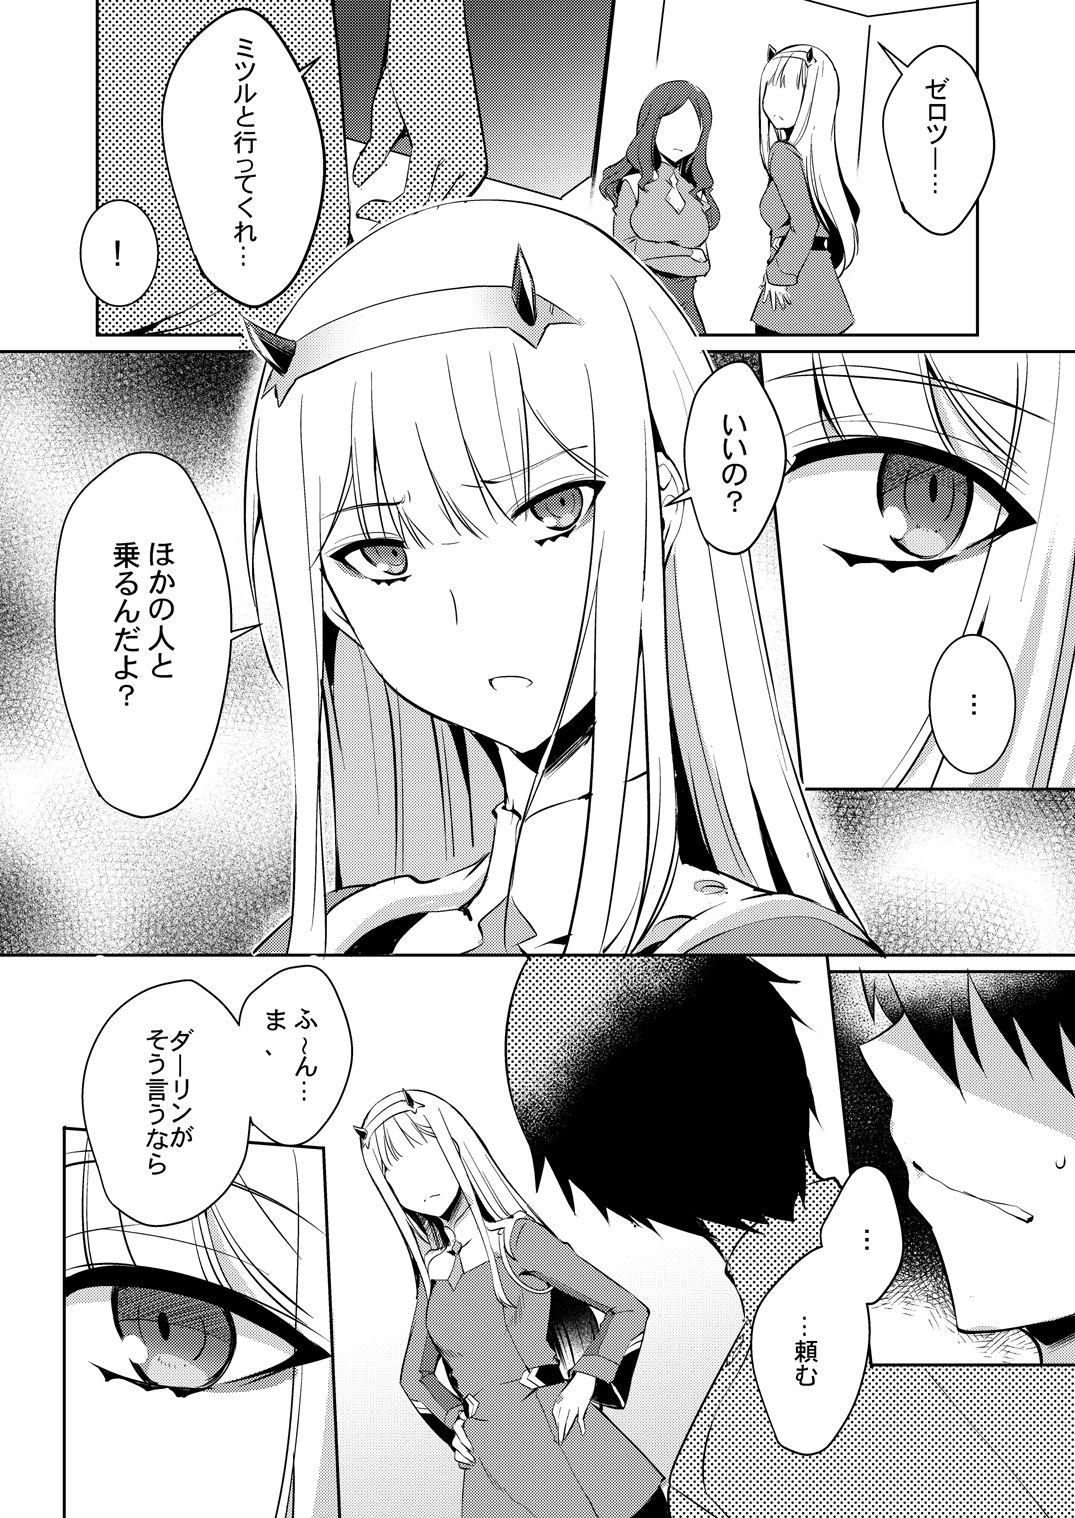 Famosa Mitsuru in the Zero Two - Darling in the franxx Naked Sex - Page 6